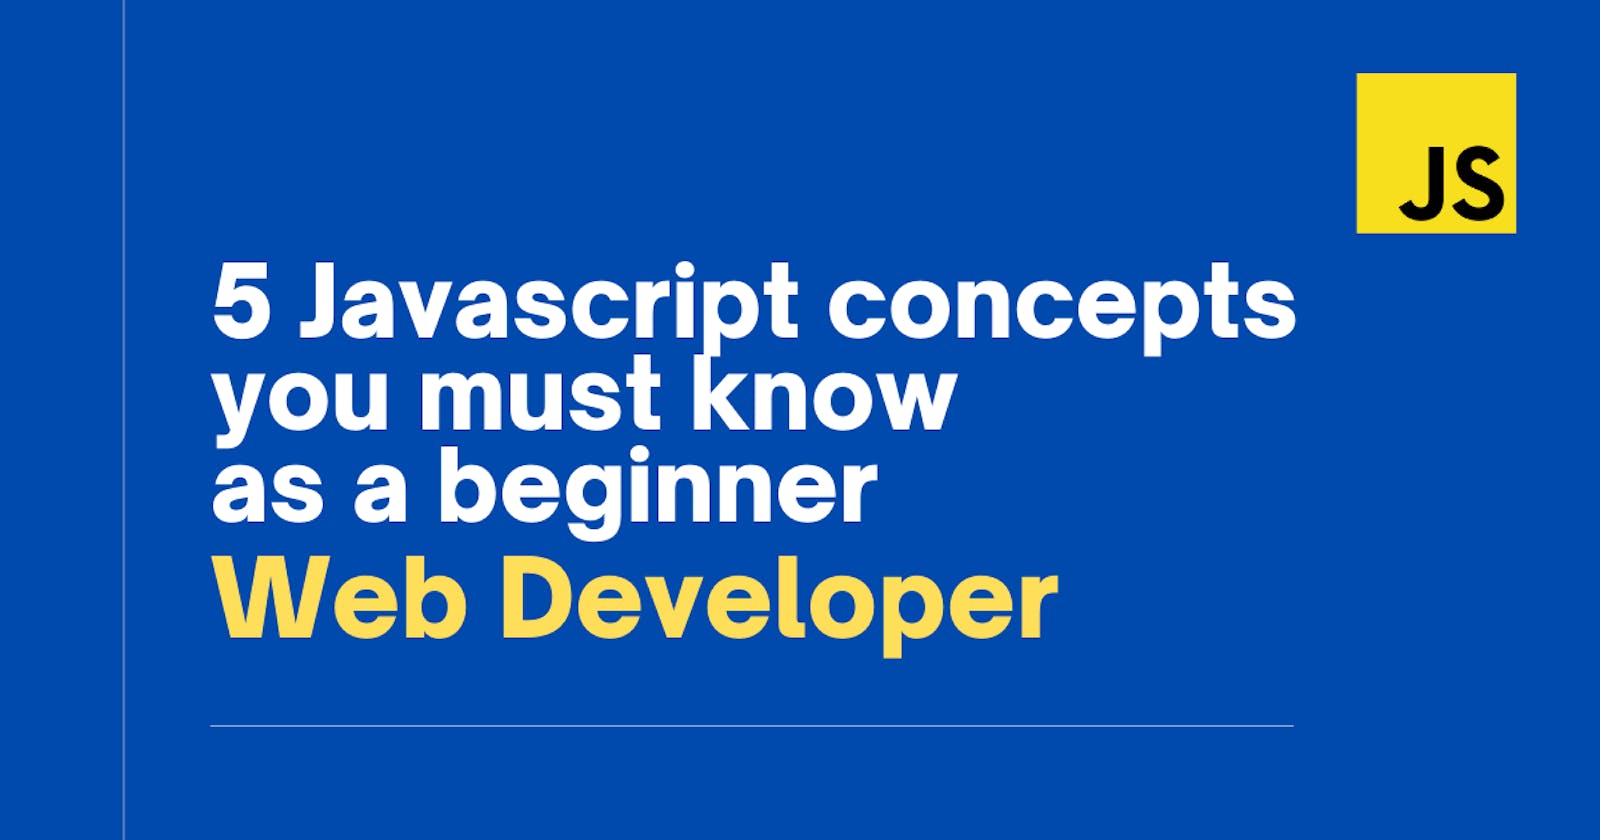 5 Javascript concepts you must know as a beginner web developer